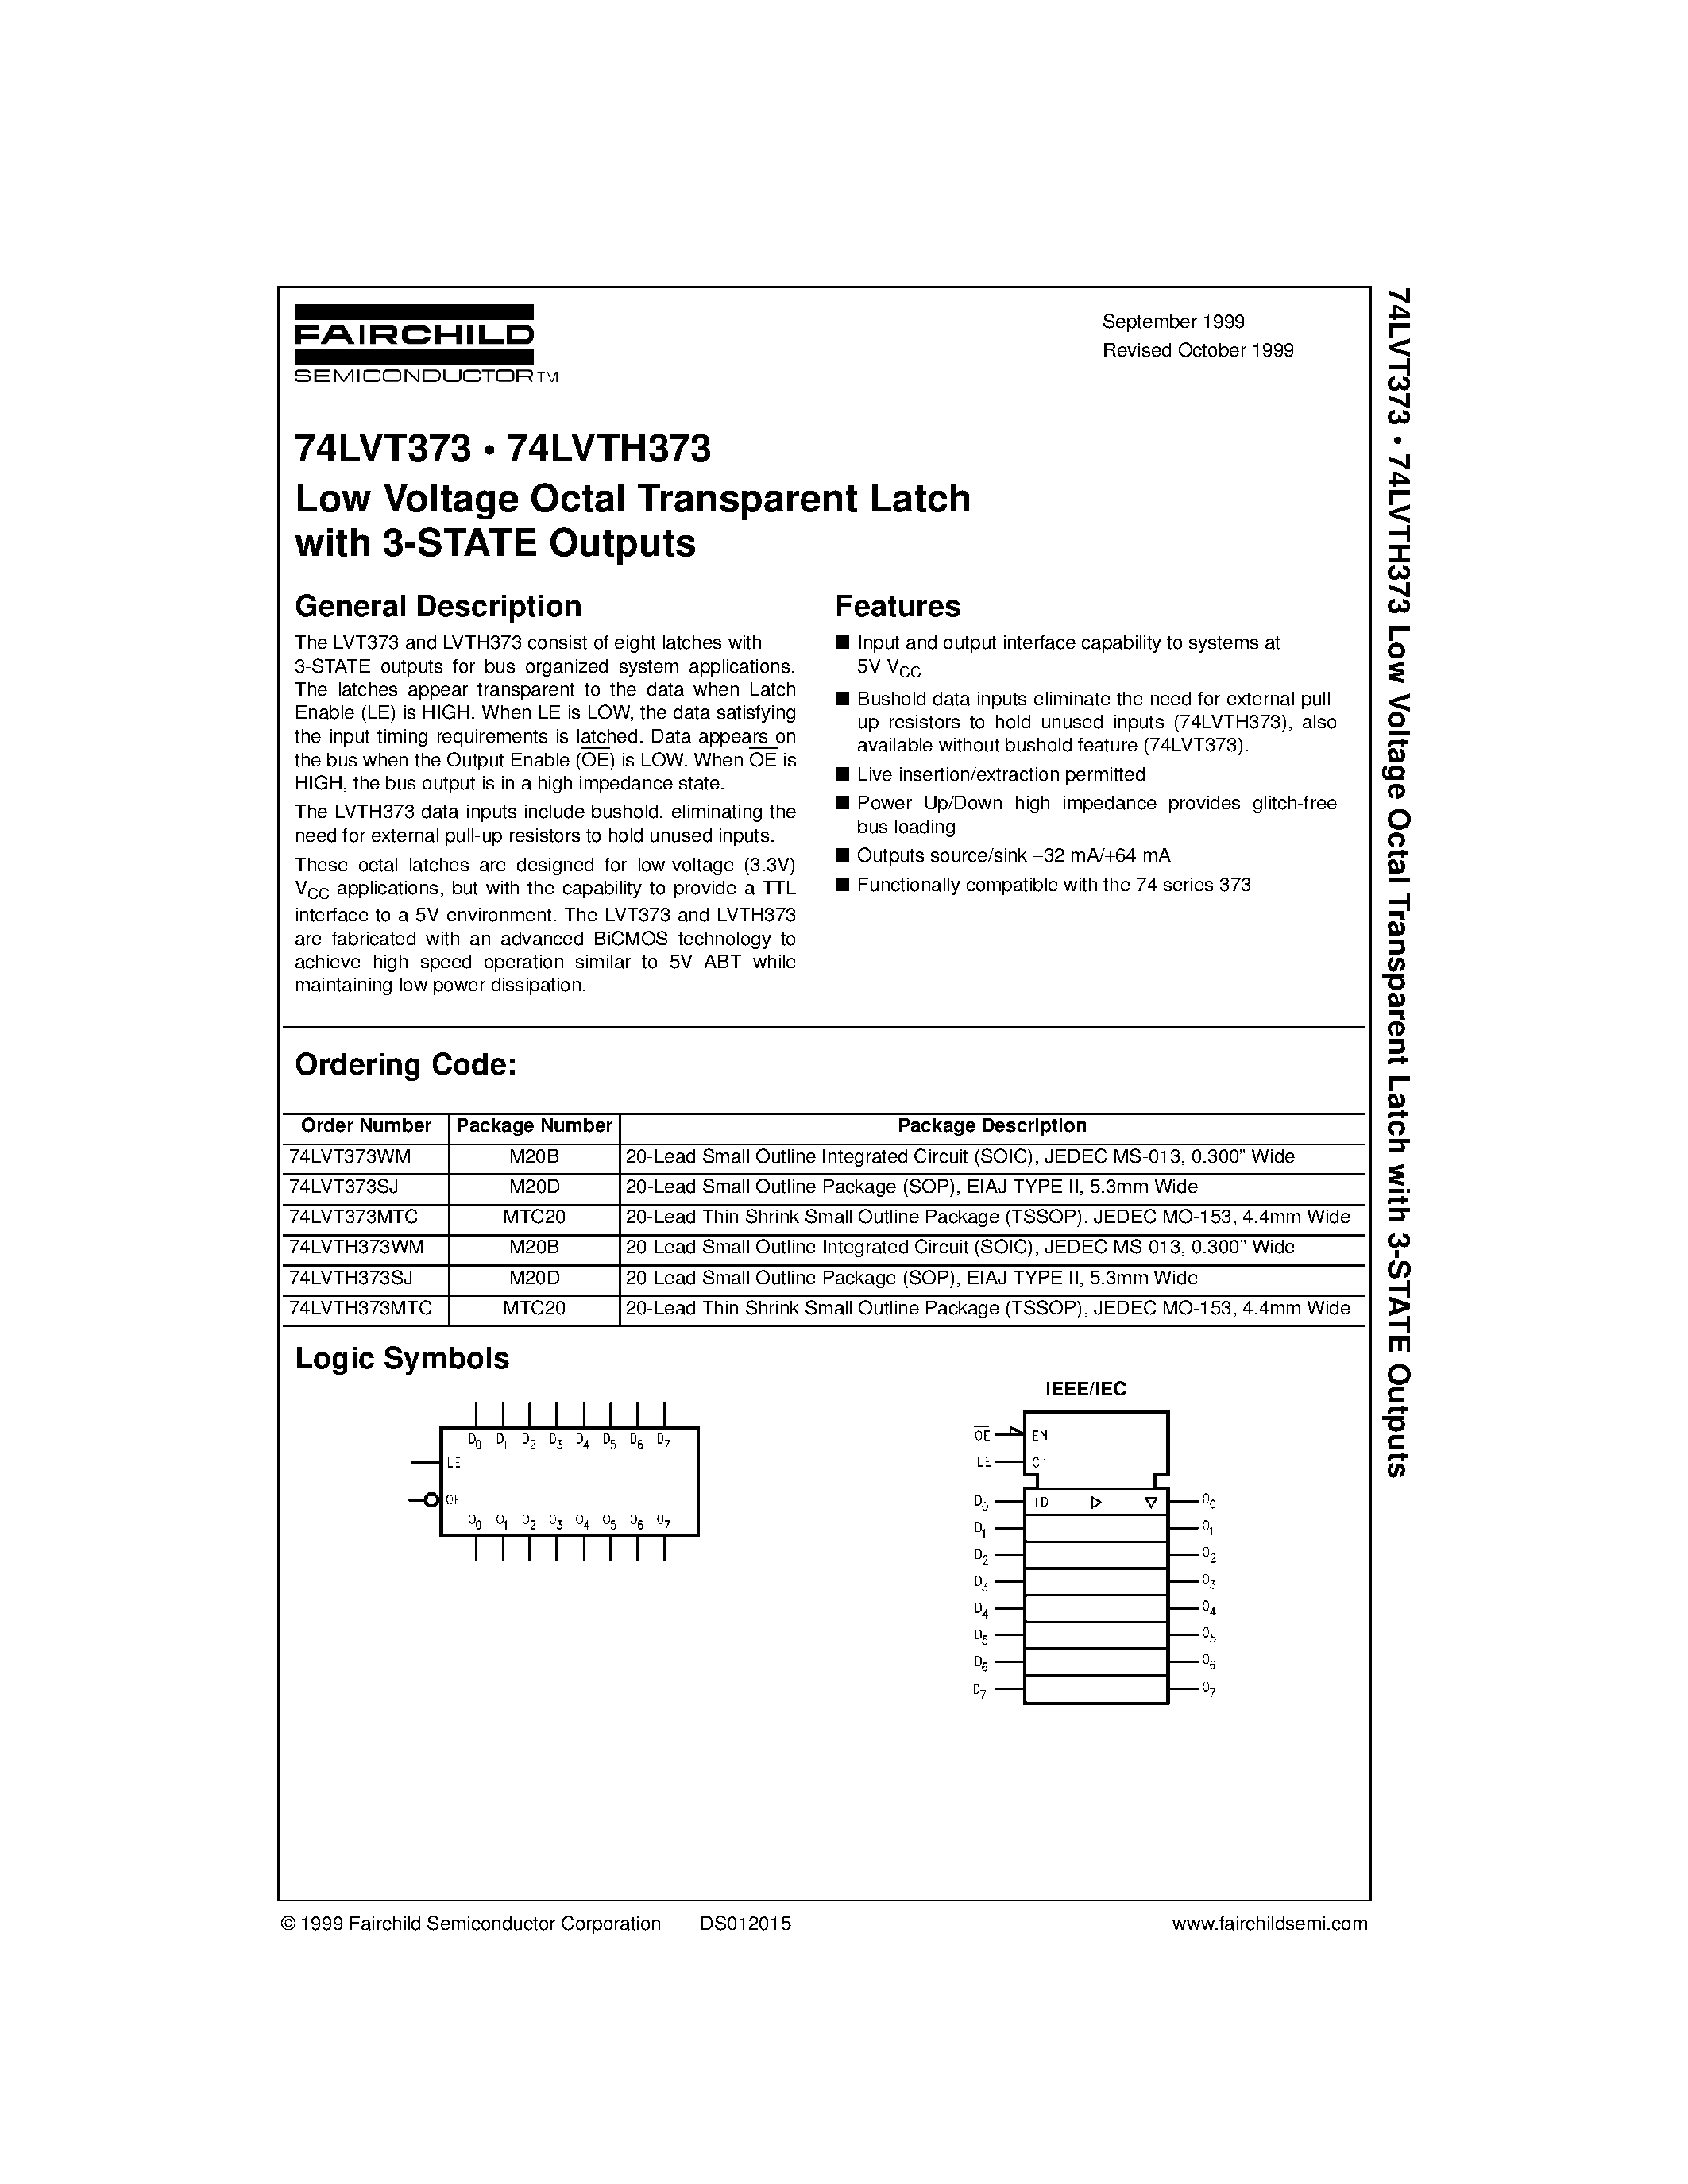 Datasheet 74LVT373 - Low Voltage Octal Transparent Latch with 3-STATE Outputs page 1